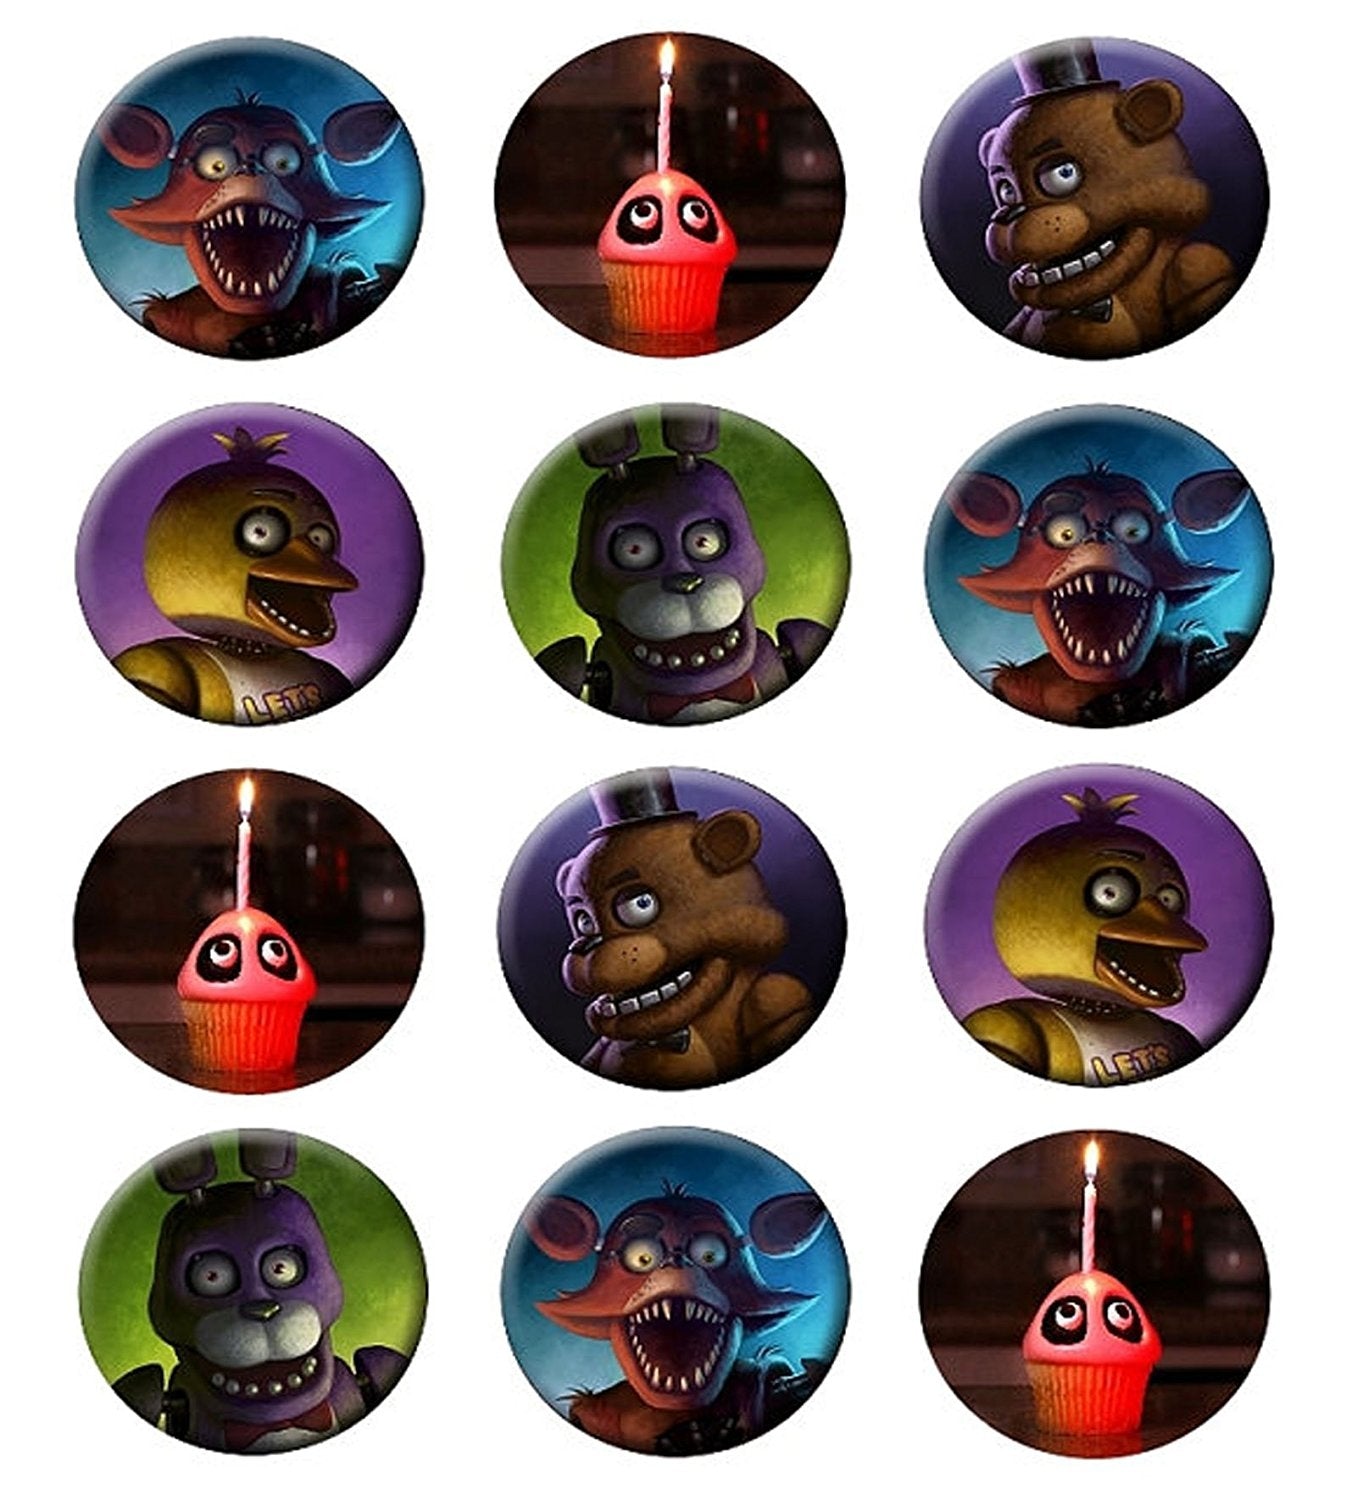 Five Nights at Freddy's Freddy Fazbear Bonnie Foxy Chiko and a Cupcake Edible Cupcake Topper Images ABPID08029